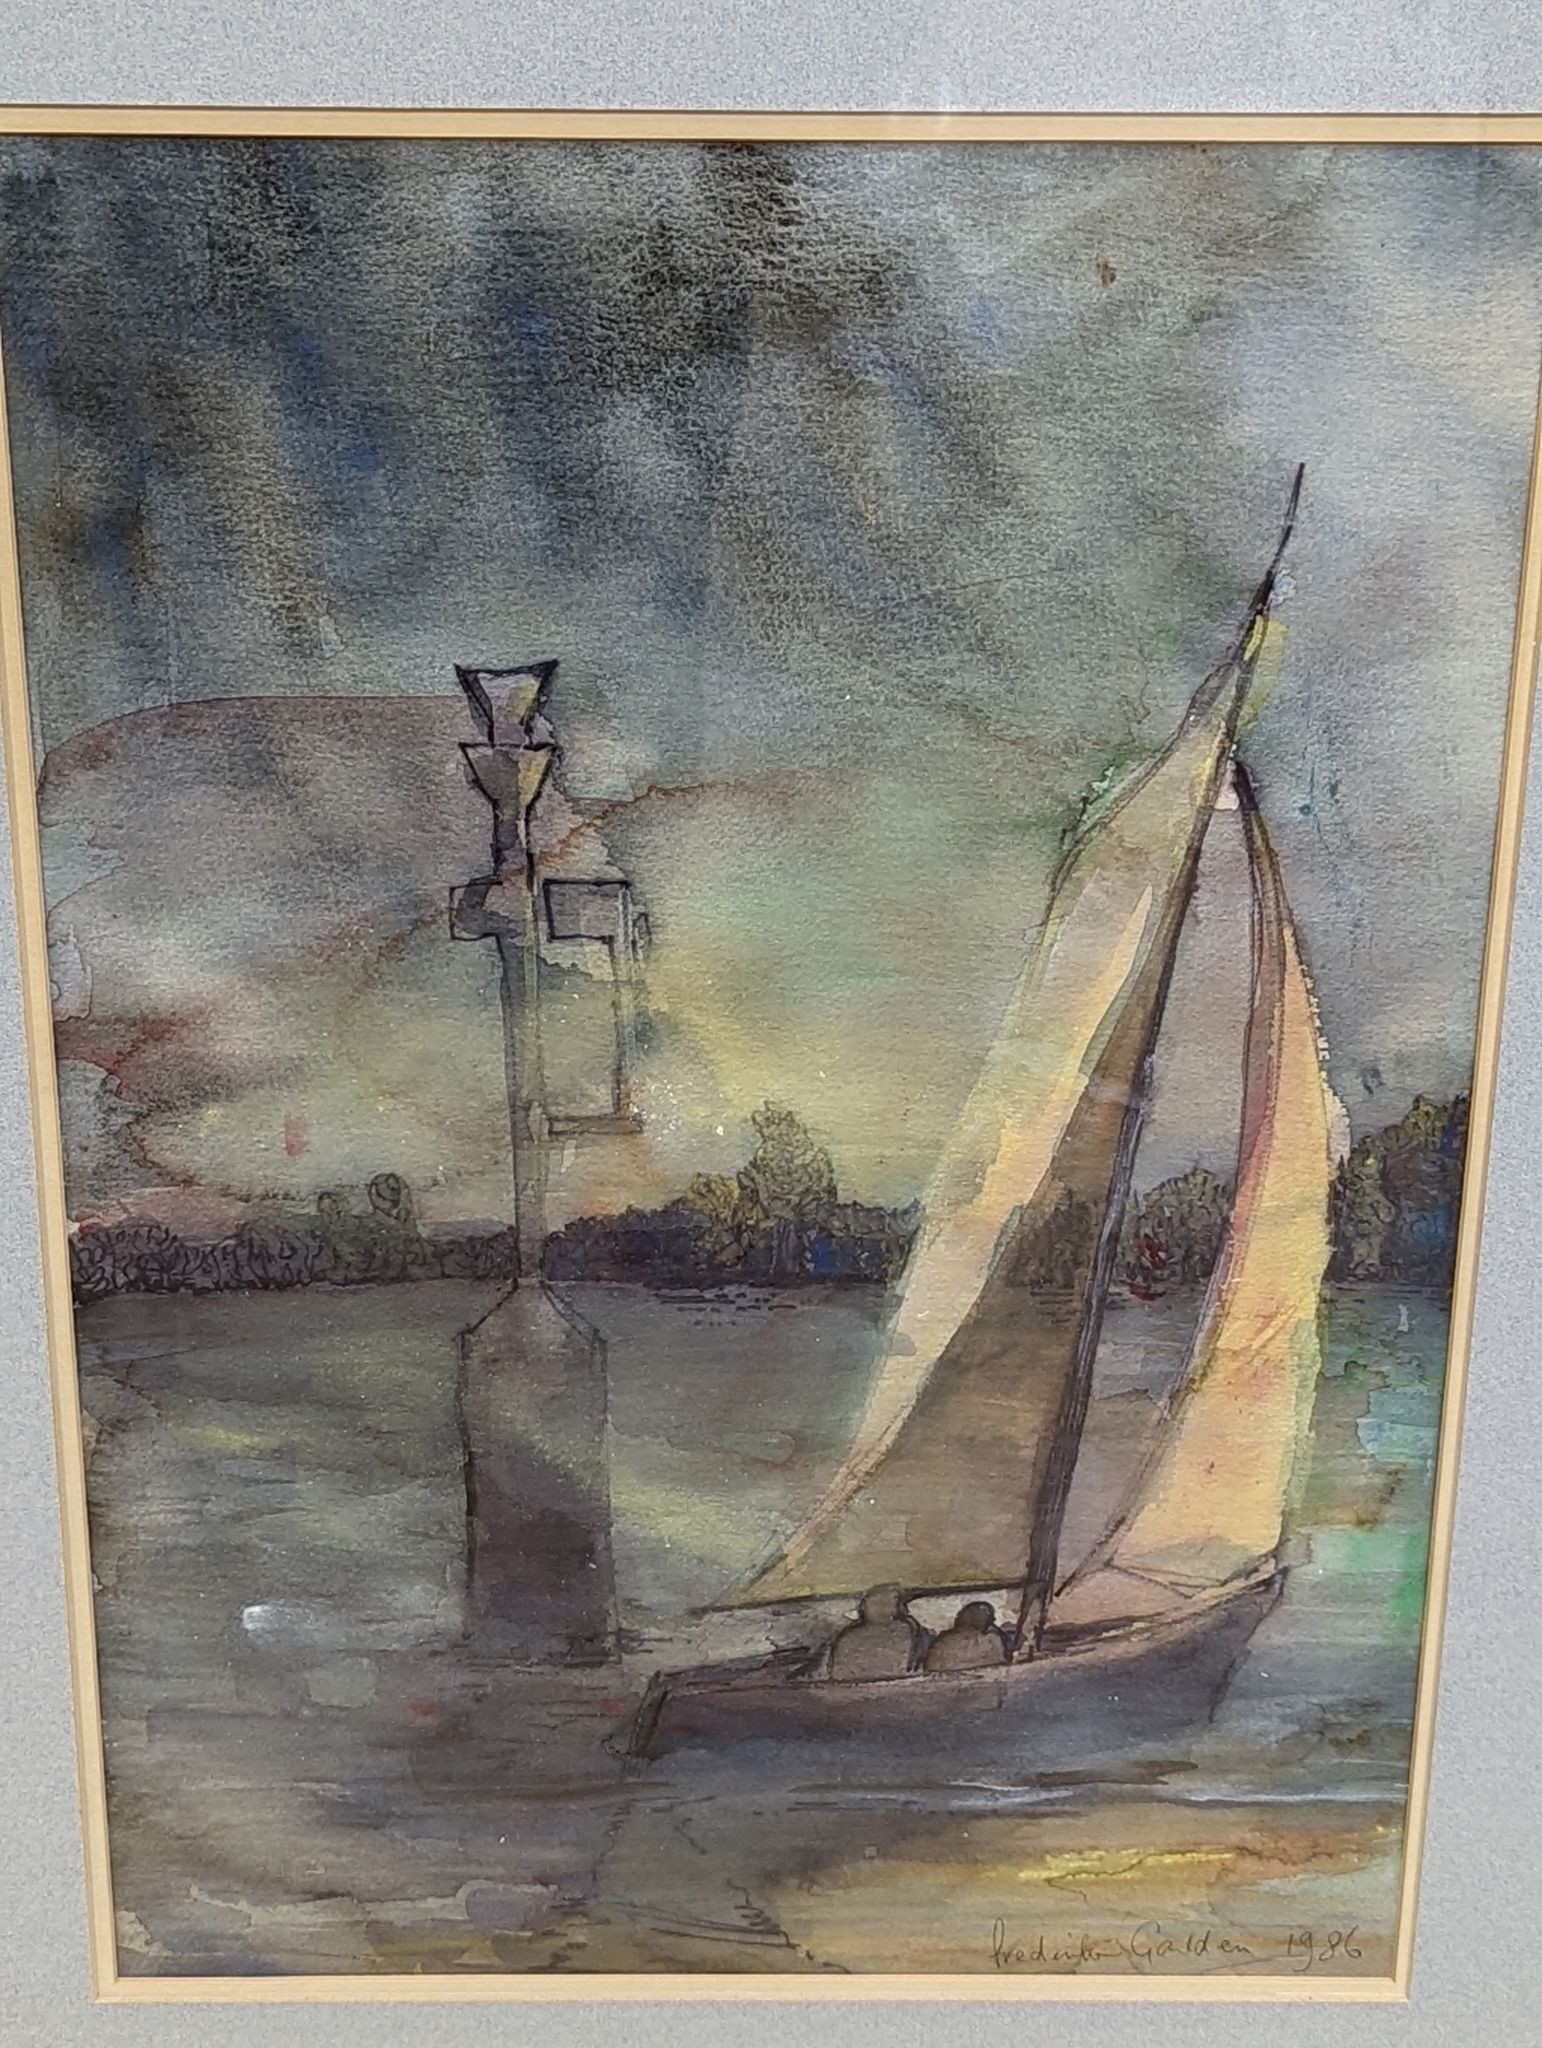 Frederick Galden, watercolour, Sailing dingy on an estuary, signed and dated 1986, 52 , x 35cm and an Elizabeth Cameron watercolour of fhisng boats, 35 x 26cm